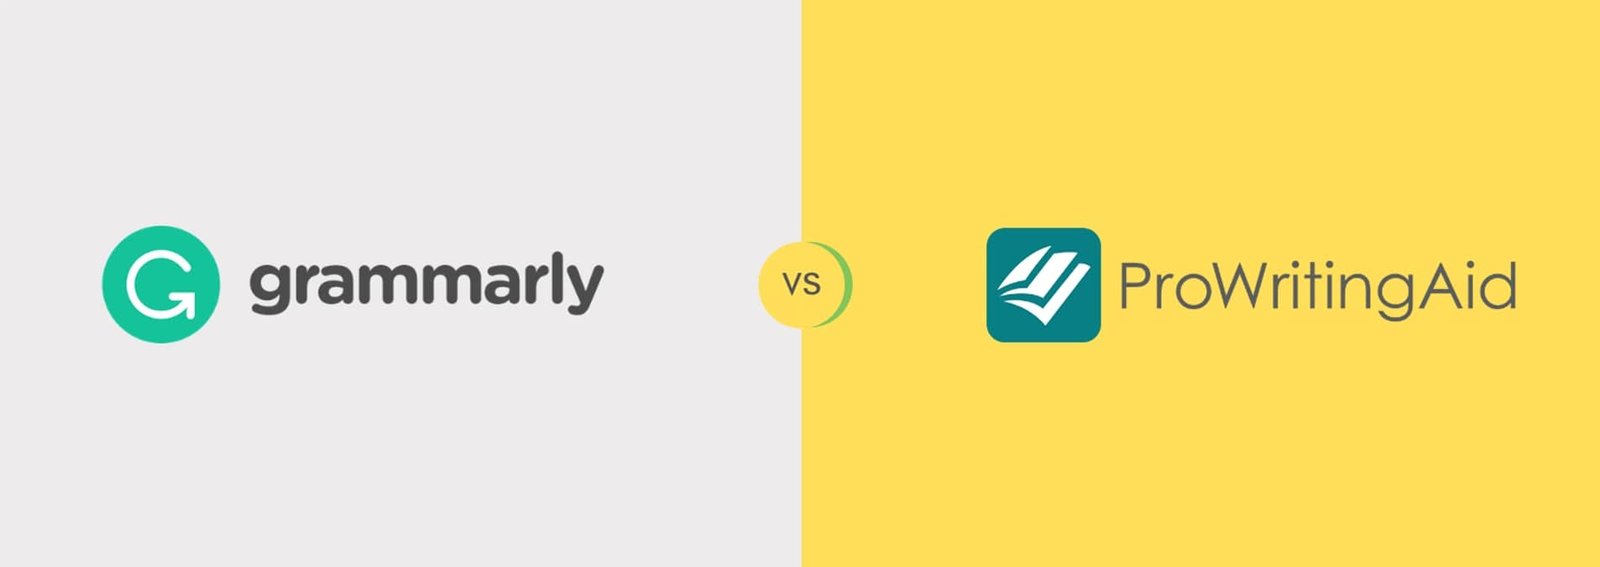 Grammarly vs. ProWritingAid: Writing Assistant Comparison